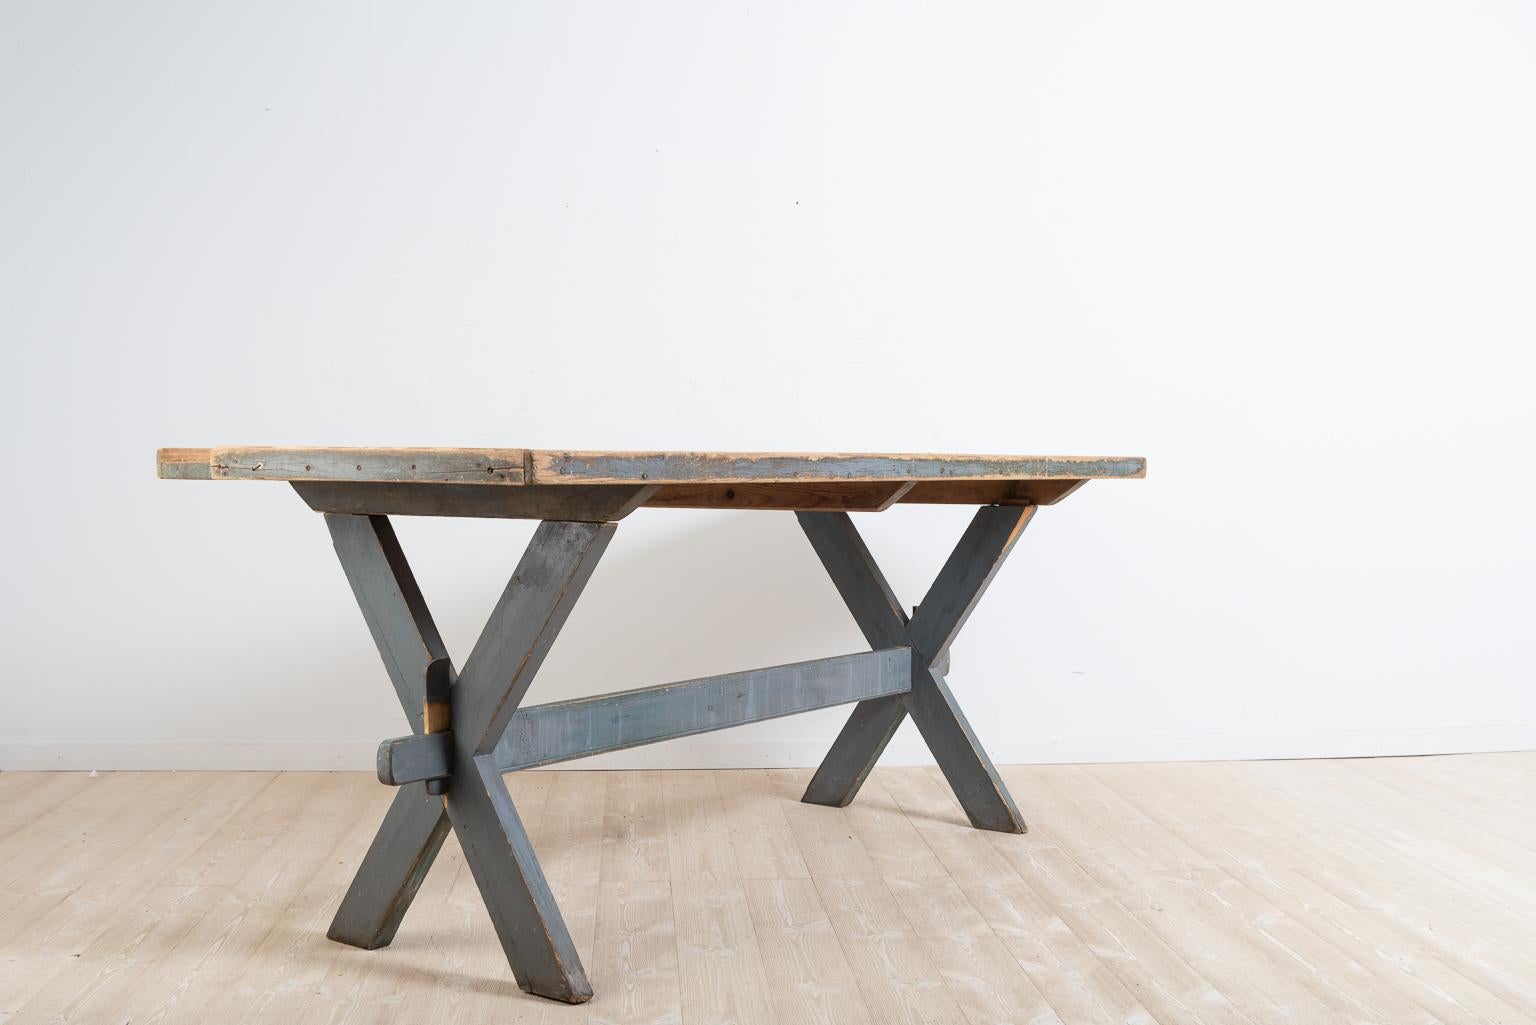 Antique Swedish work or dining table from the mid-1800s. The table is in untouched original condition with a bare wood, never painted tabletop. The leg frame is painted with the original blue grey paint. Healthy solid frame with smaller loss of